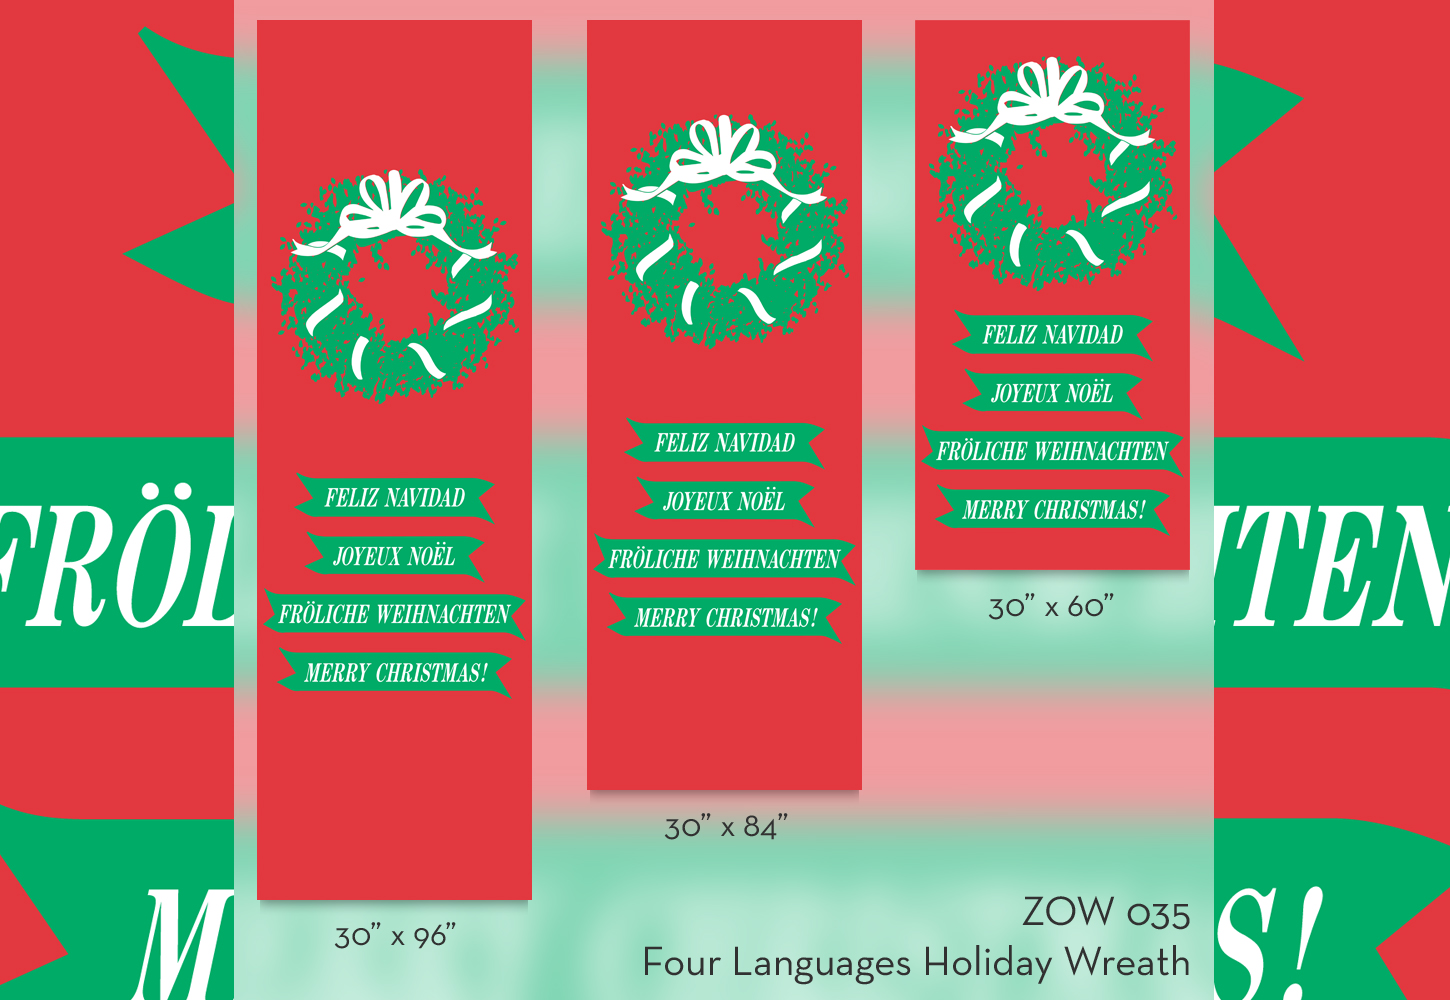 ZOW 035 Four Languages Holiday Wreath